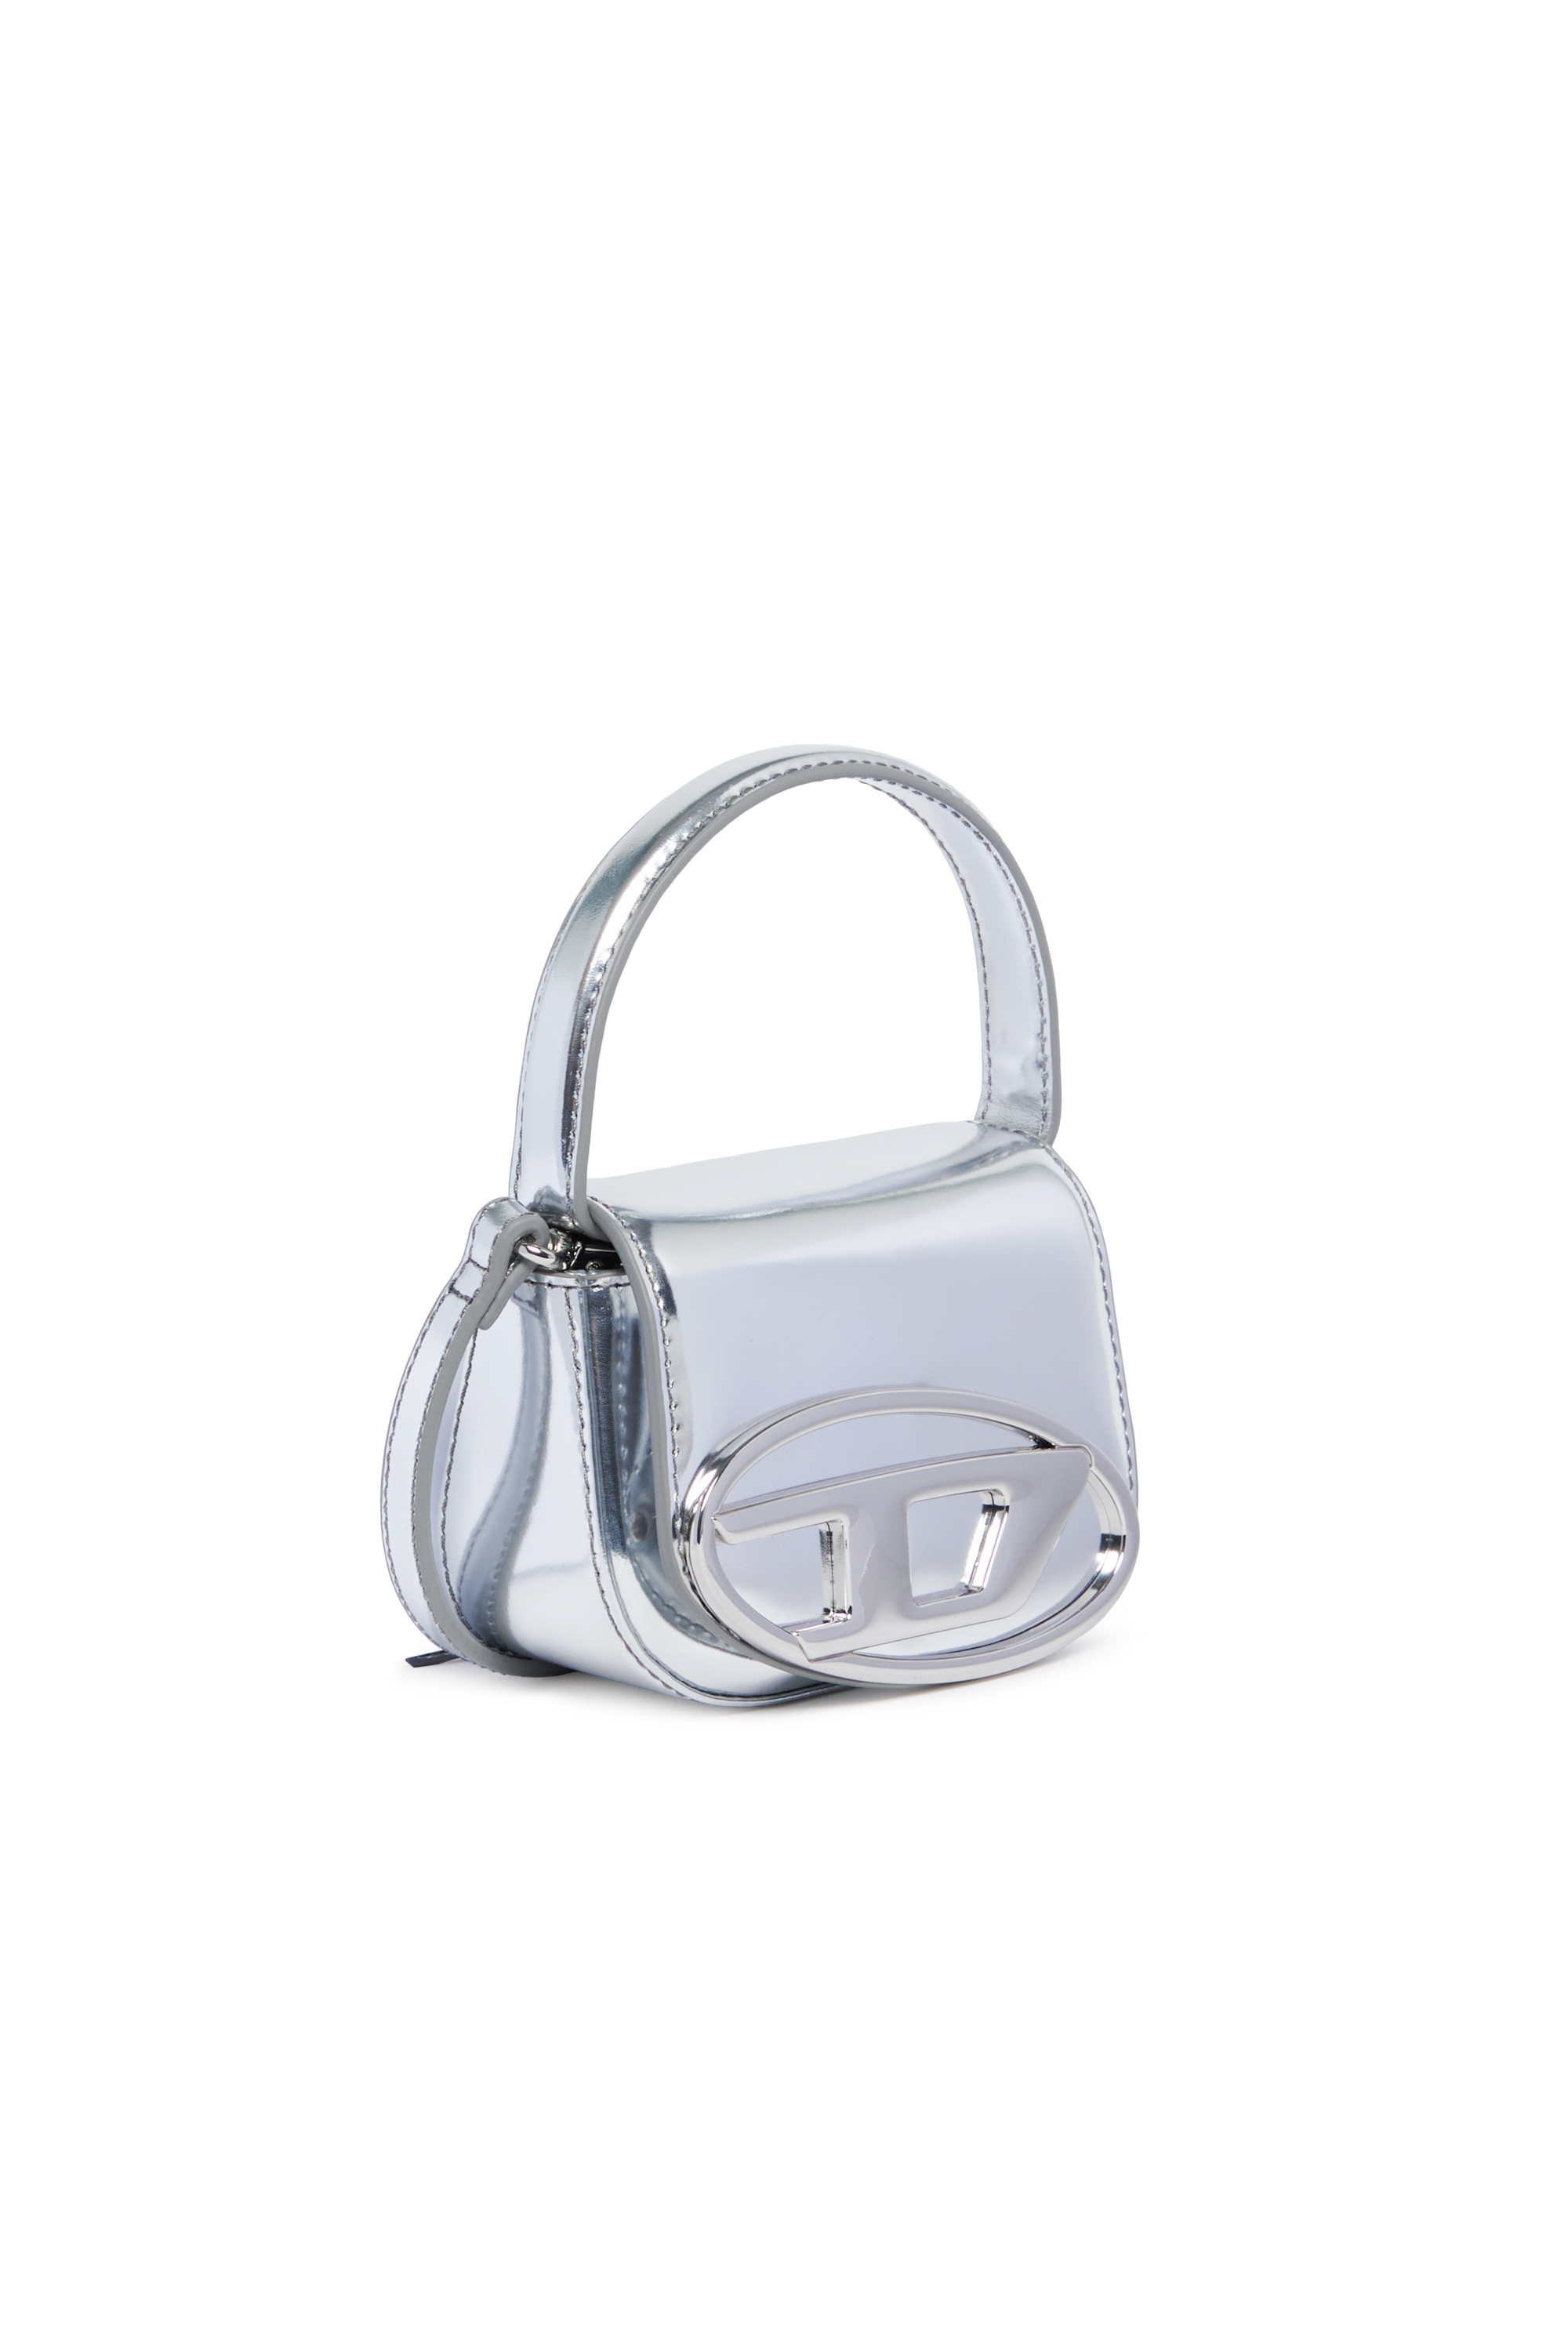 Diesel - 1DR XS, Woman Iconic mini bag in metallic leather in Silver - Image 3